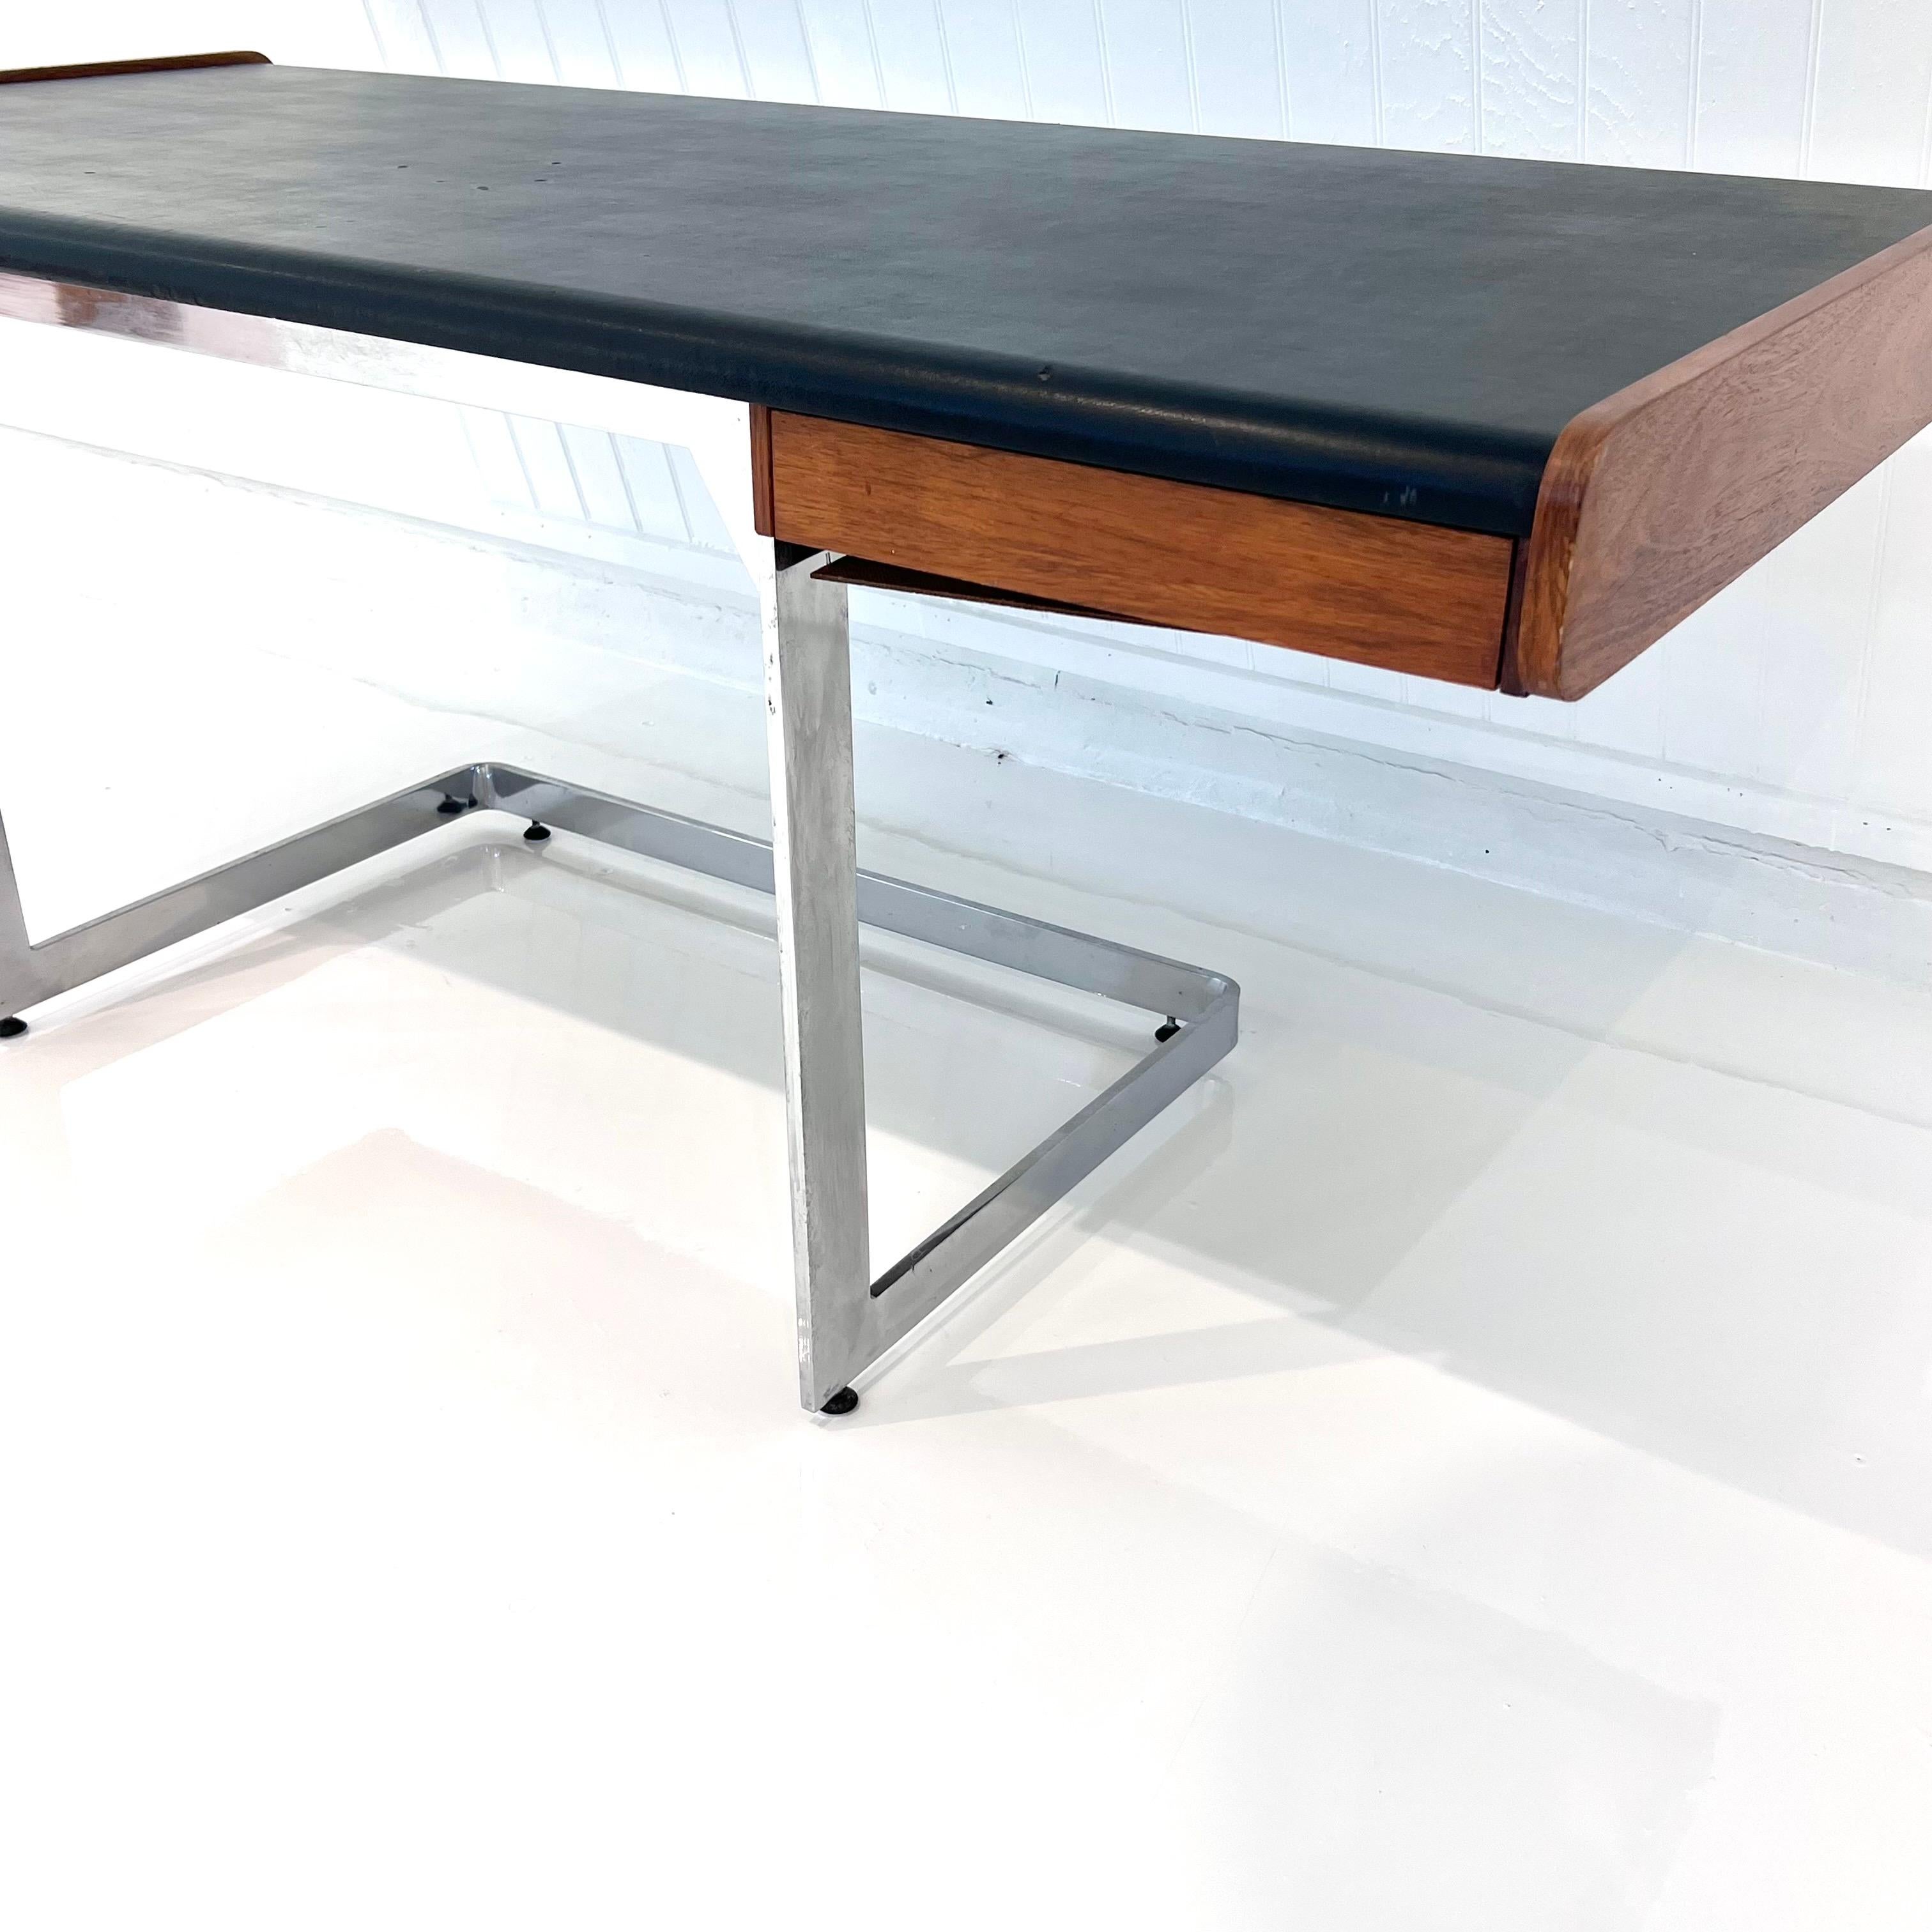 Late 20th Century Rosewood and Chrome Floating Desk by Ste. Marie & Laurent, 1970s Canada